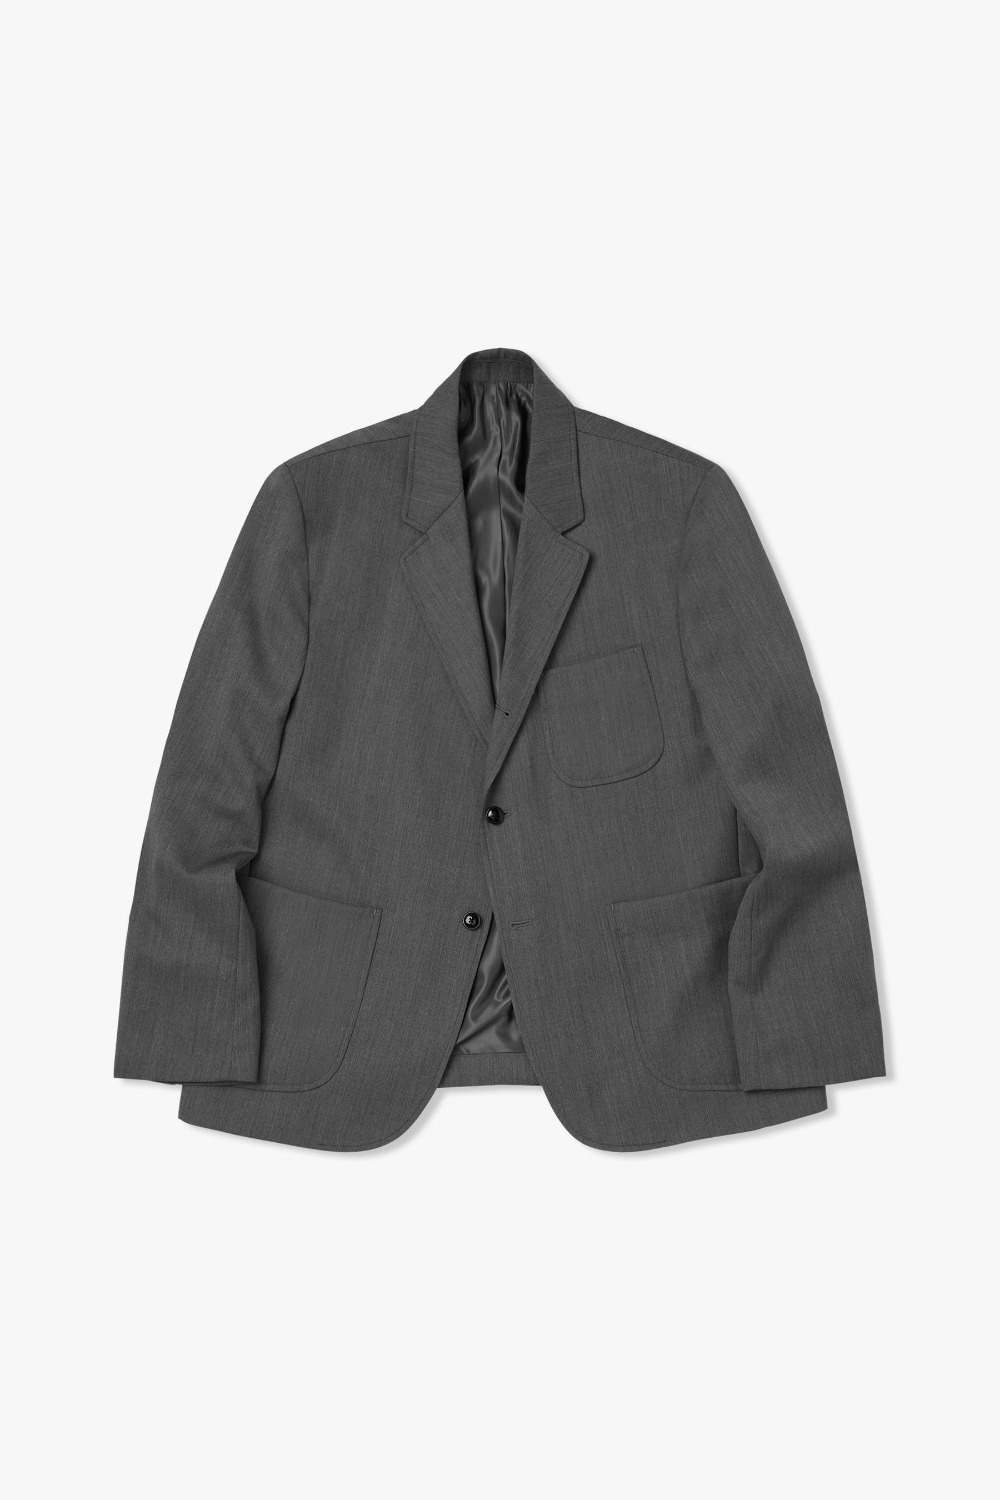 GREY PHONIC SINGLE BREASTED BLAZER(STEREO TYPE)